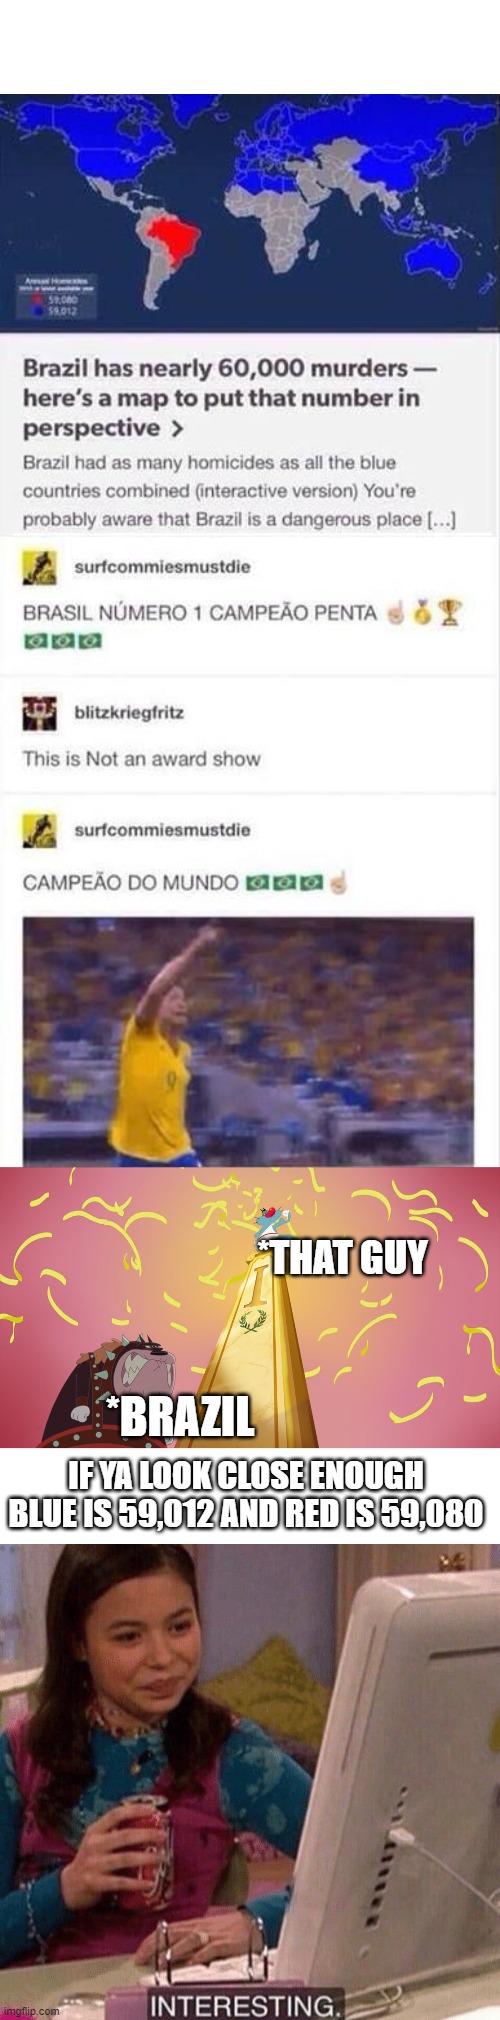 Picture memes 3656RNKK9 by PETRIXXX: 2 comments - iFunny Brazil